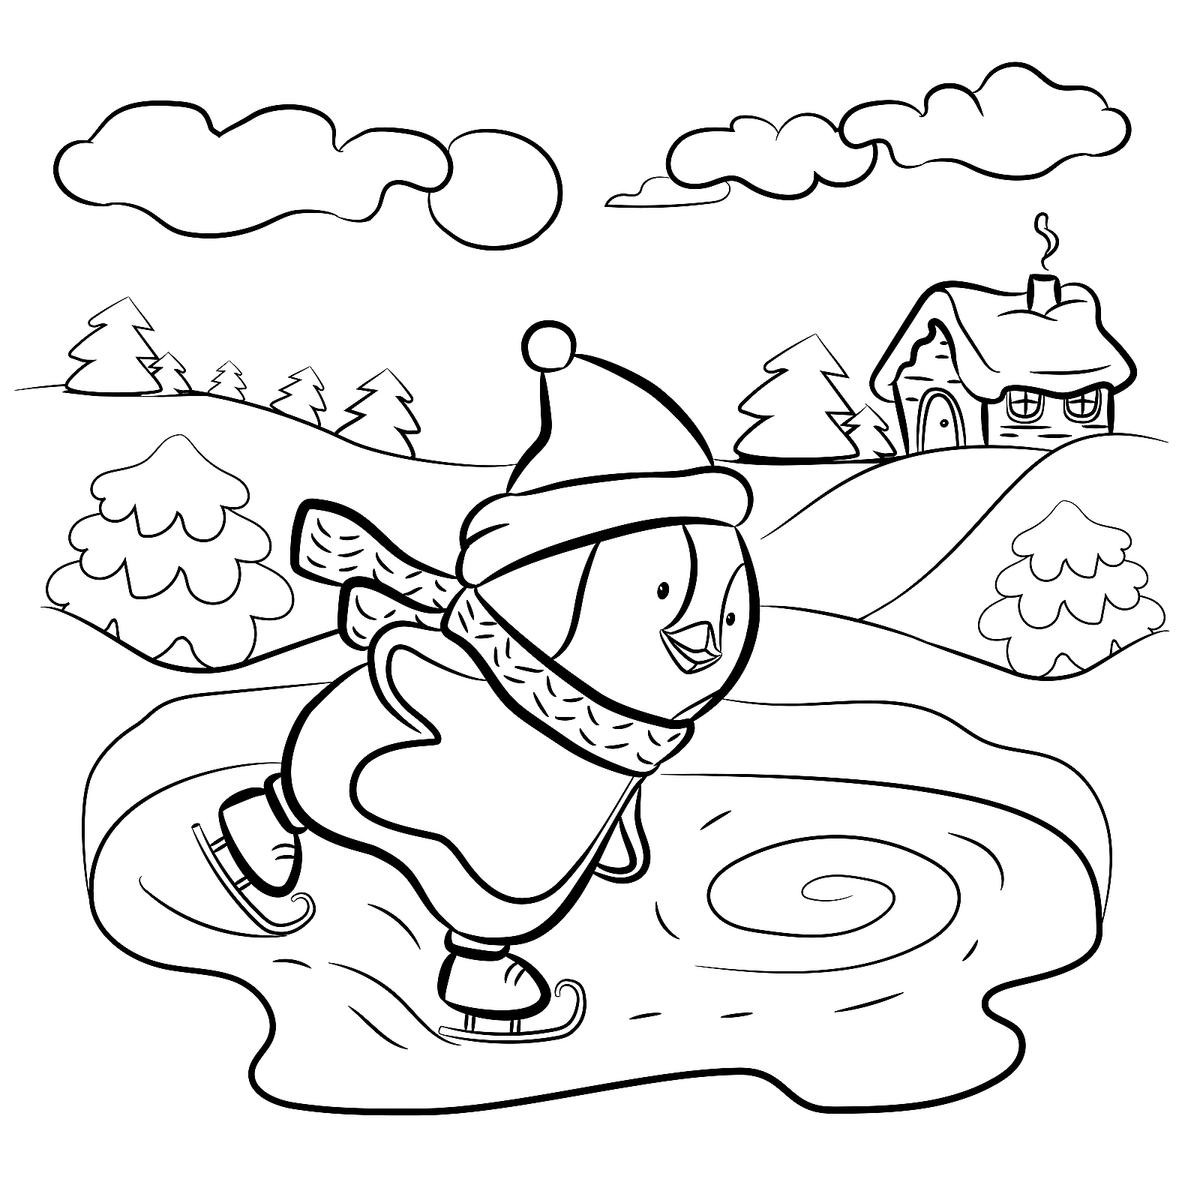 Coloring Pages For Kids Winter
 Winter Puzzle & Coloring Pages Printable Winter Themed